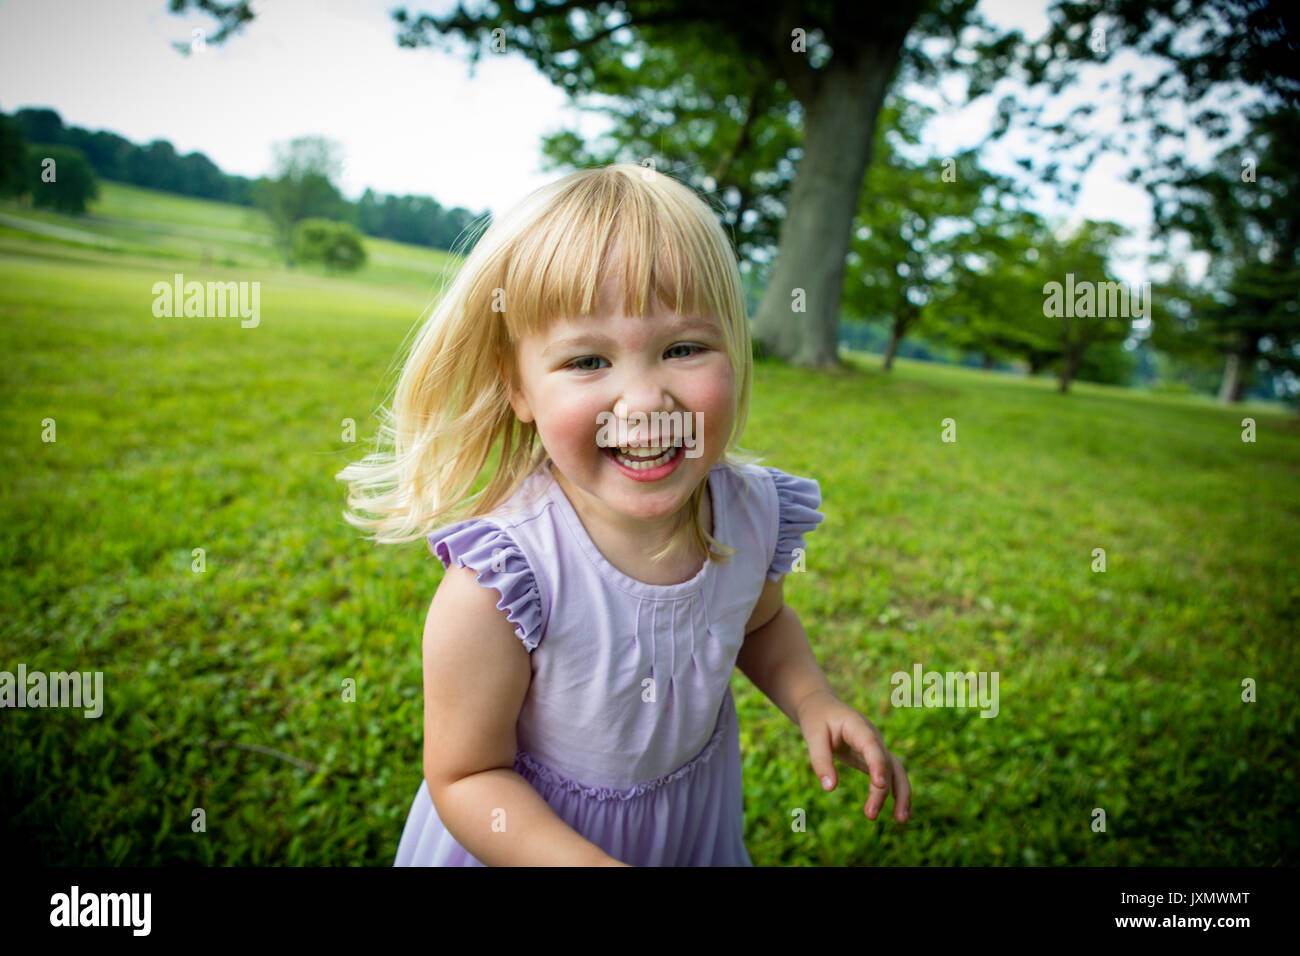 Portrait of blond haired girl running in rural field Stock Photo